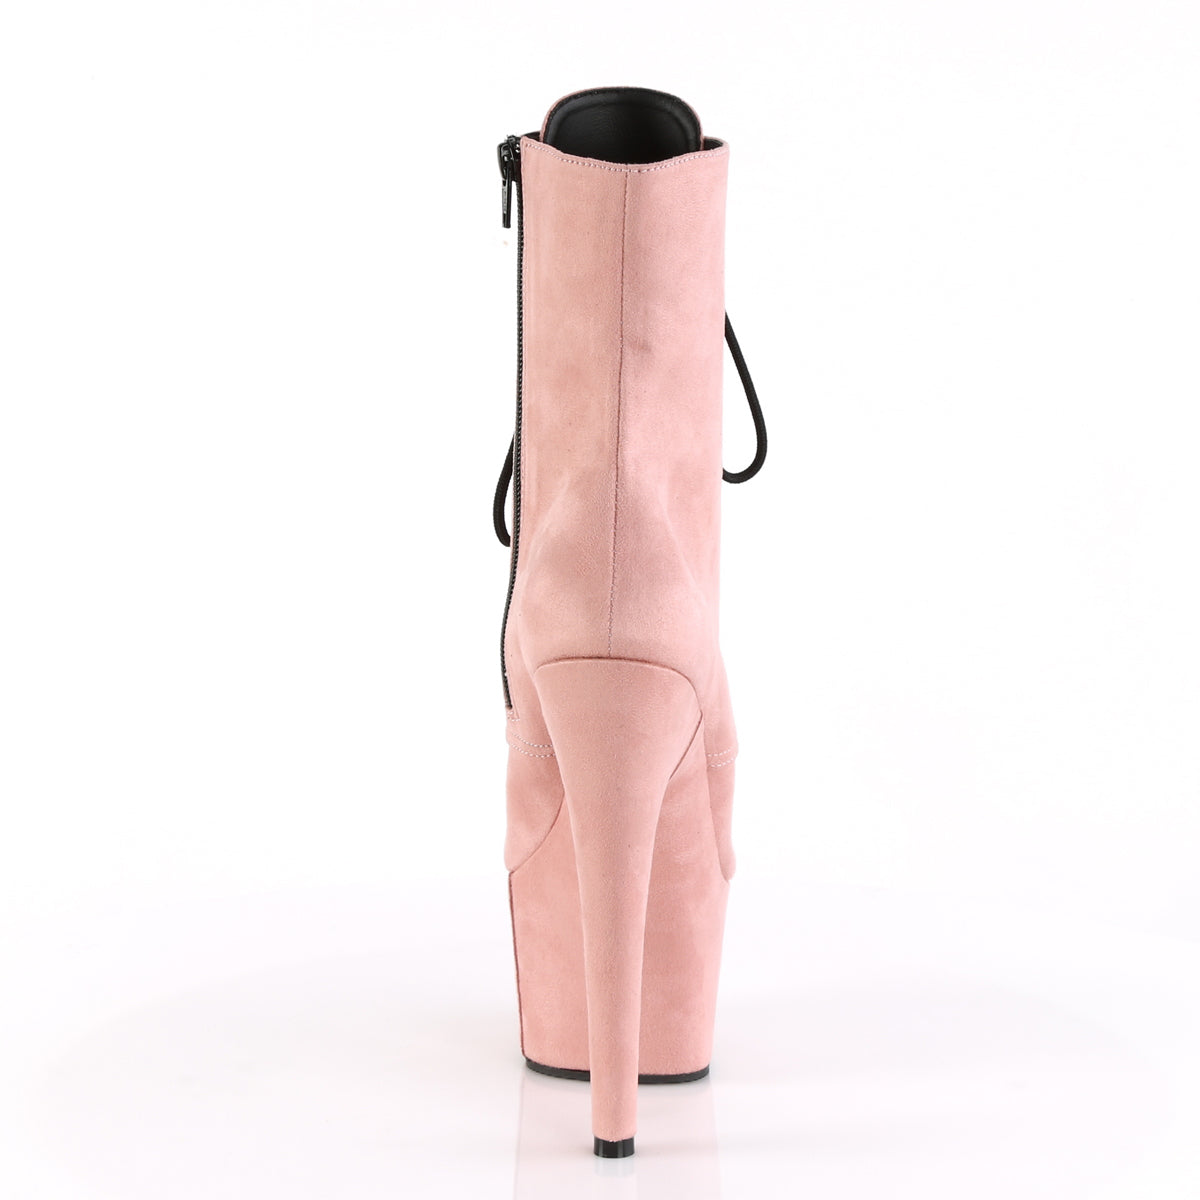 ADORE-1020FS 7 Inch Heel Baby Pink Exotic Dancing Ankle Boot-Pleaser- Sexy Shoes Fetish Footwear